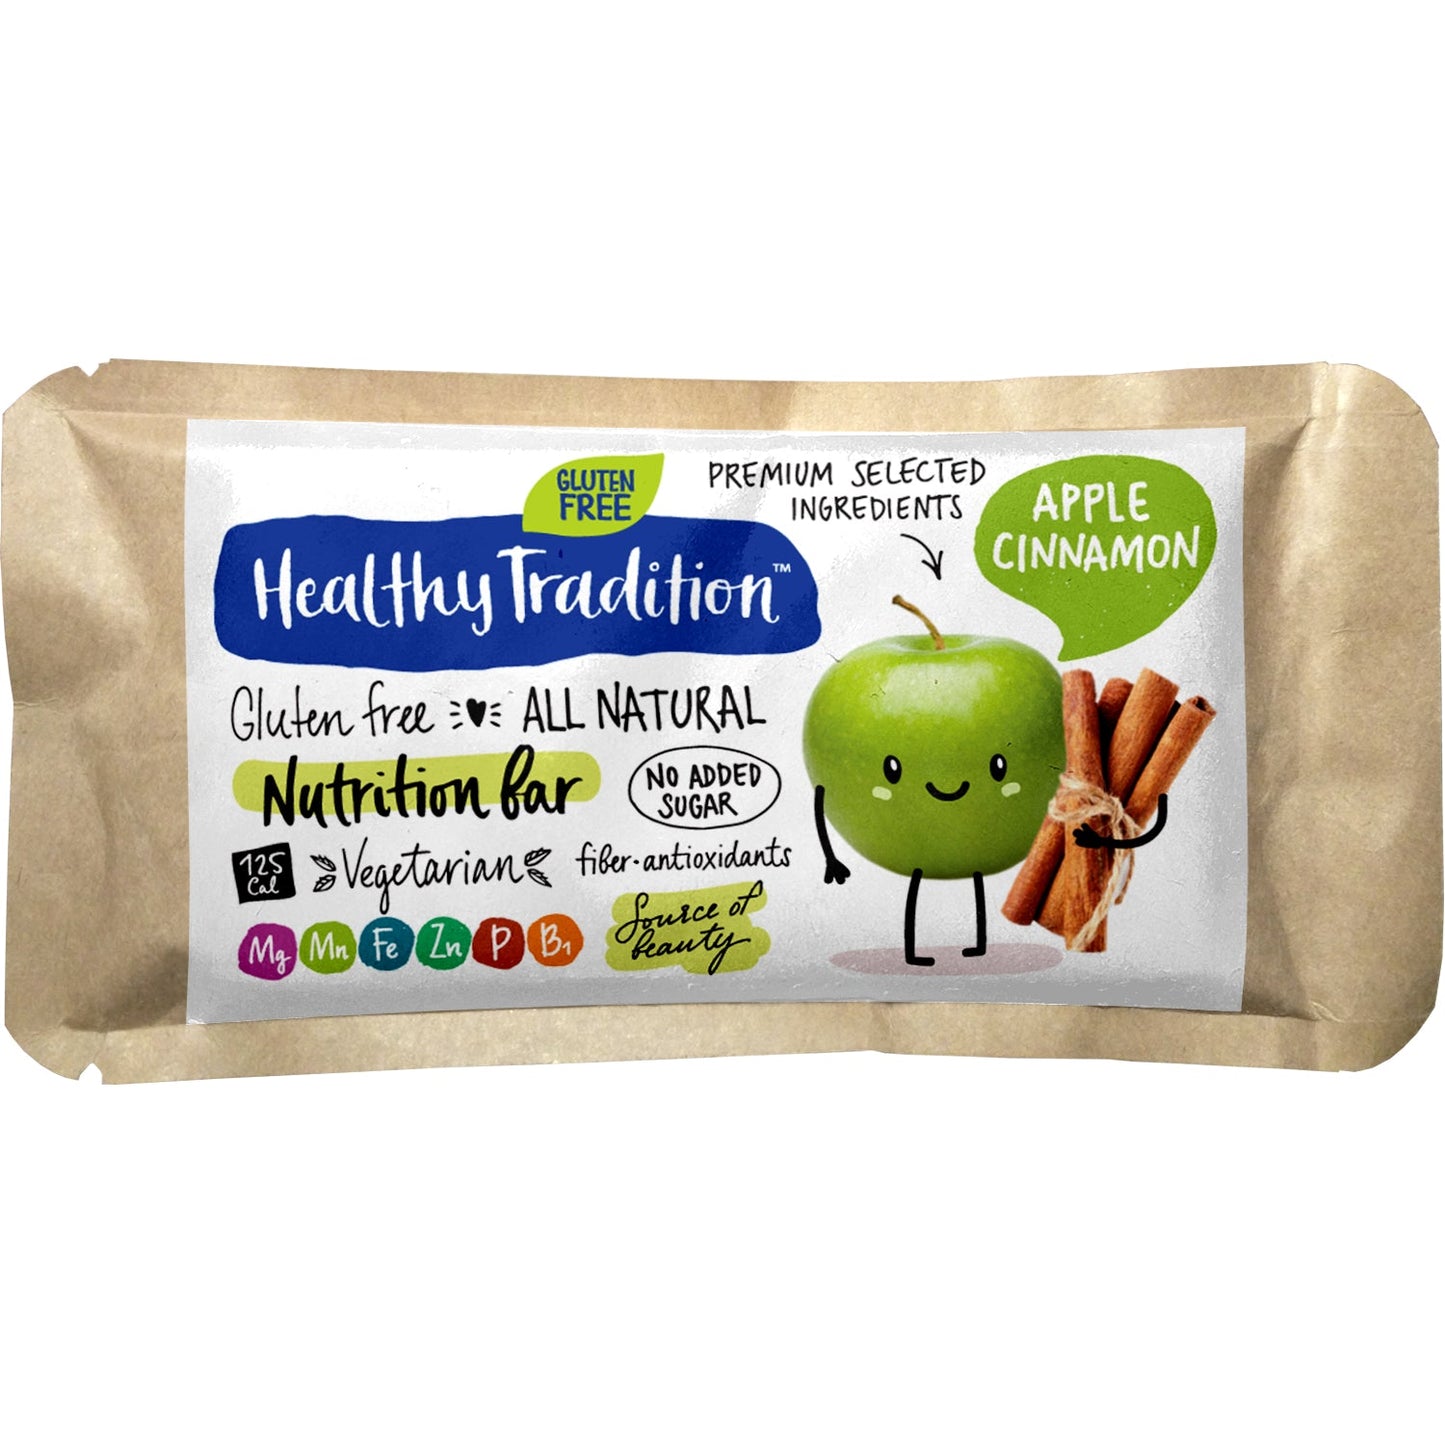 "Cinnamon Apple" TM Healthy Tradition bar without sugar and gluten, 34g